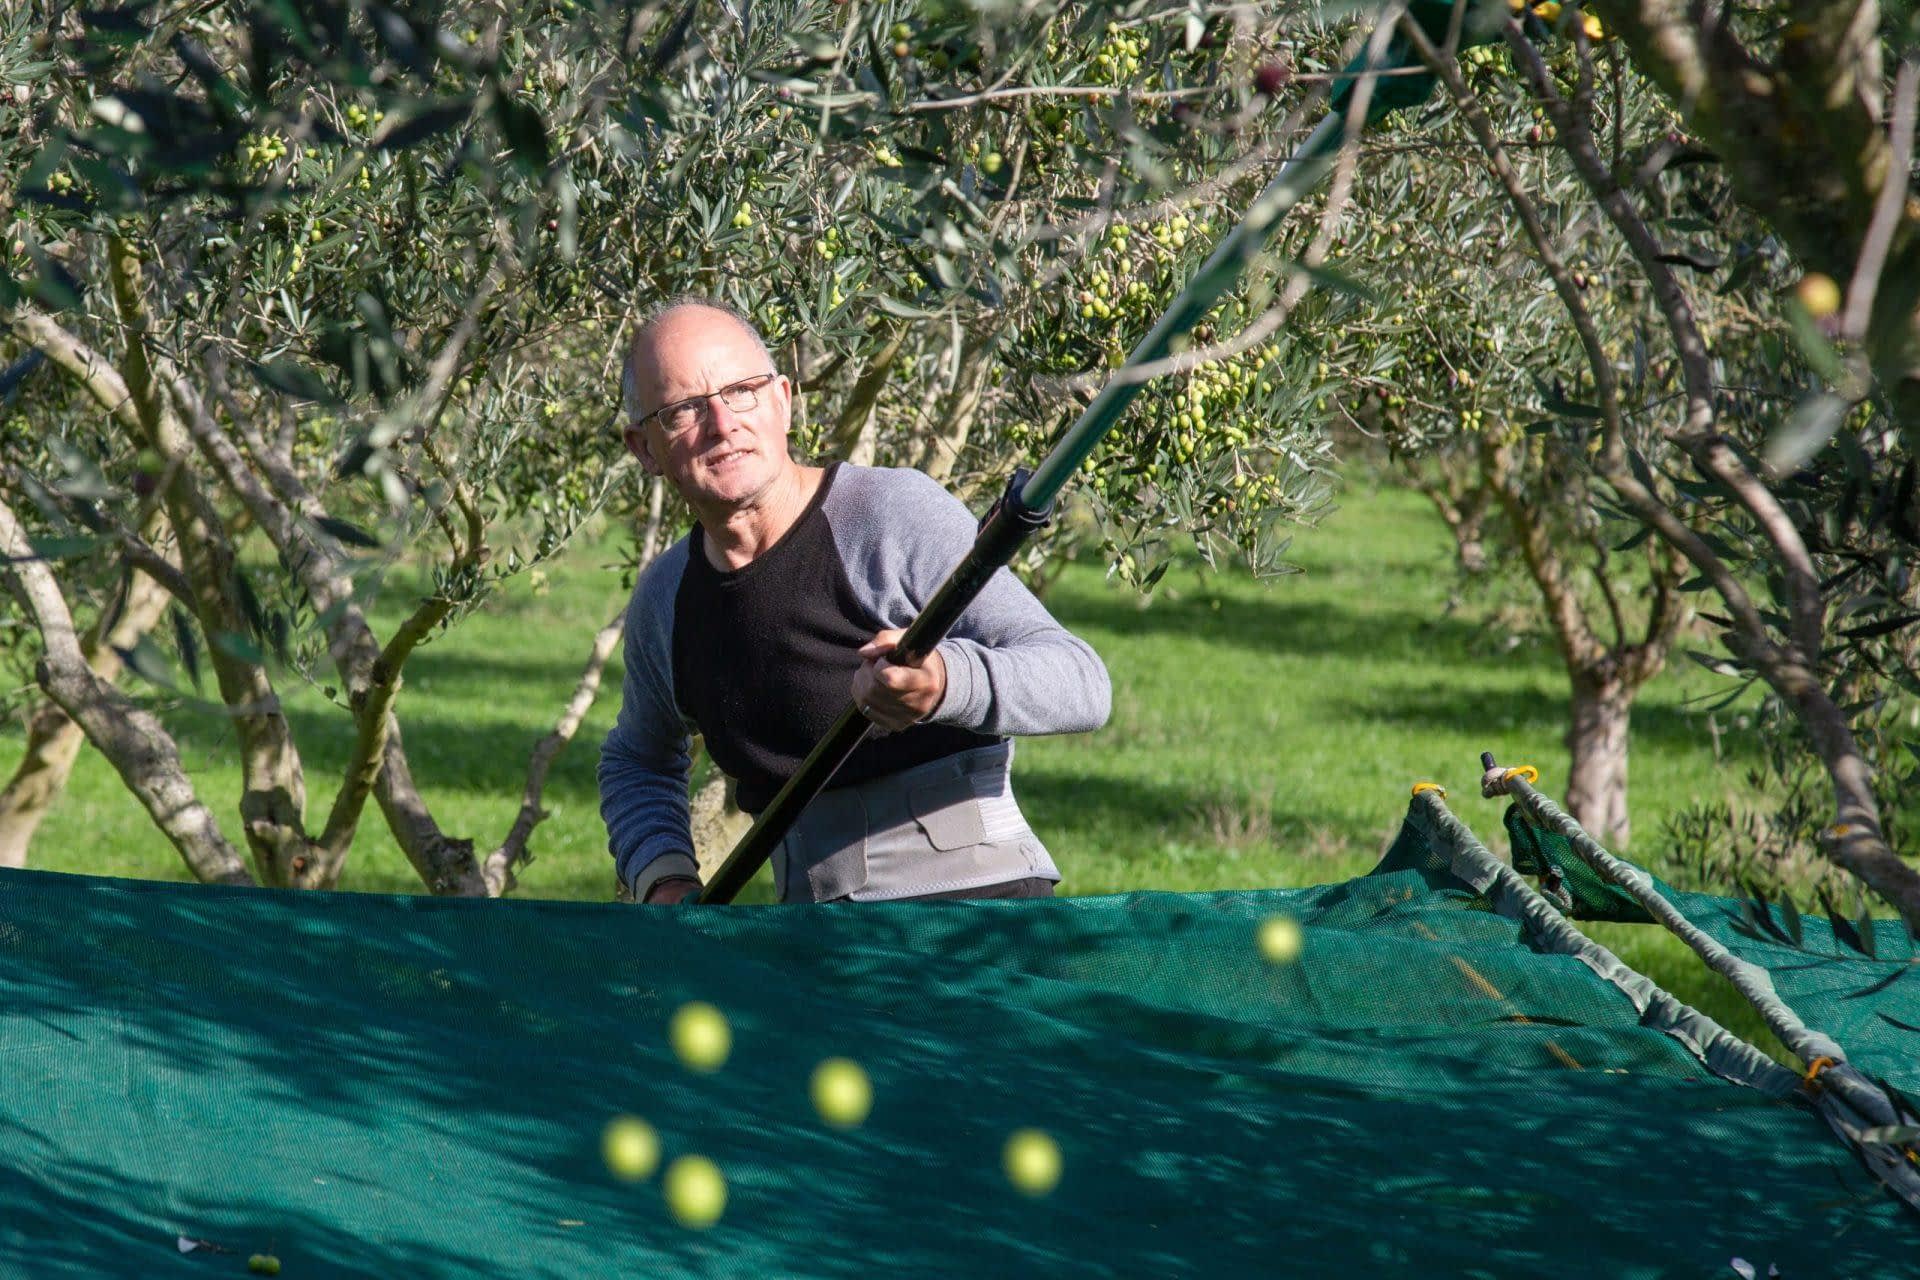 production-business-australia-and-new-zealand-new-zealand-producer-uses-brix-levels-to-determine-ideal-harvest-moment-olive-oil-times